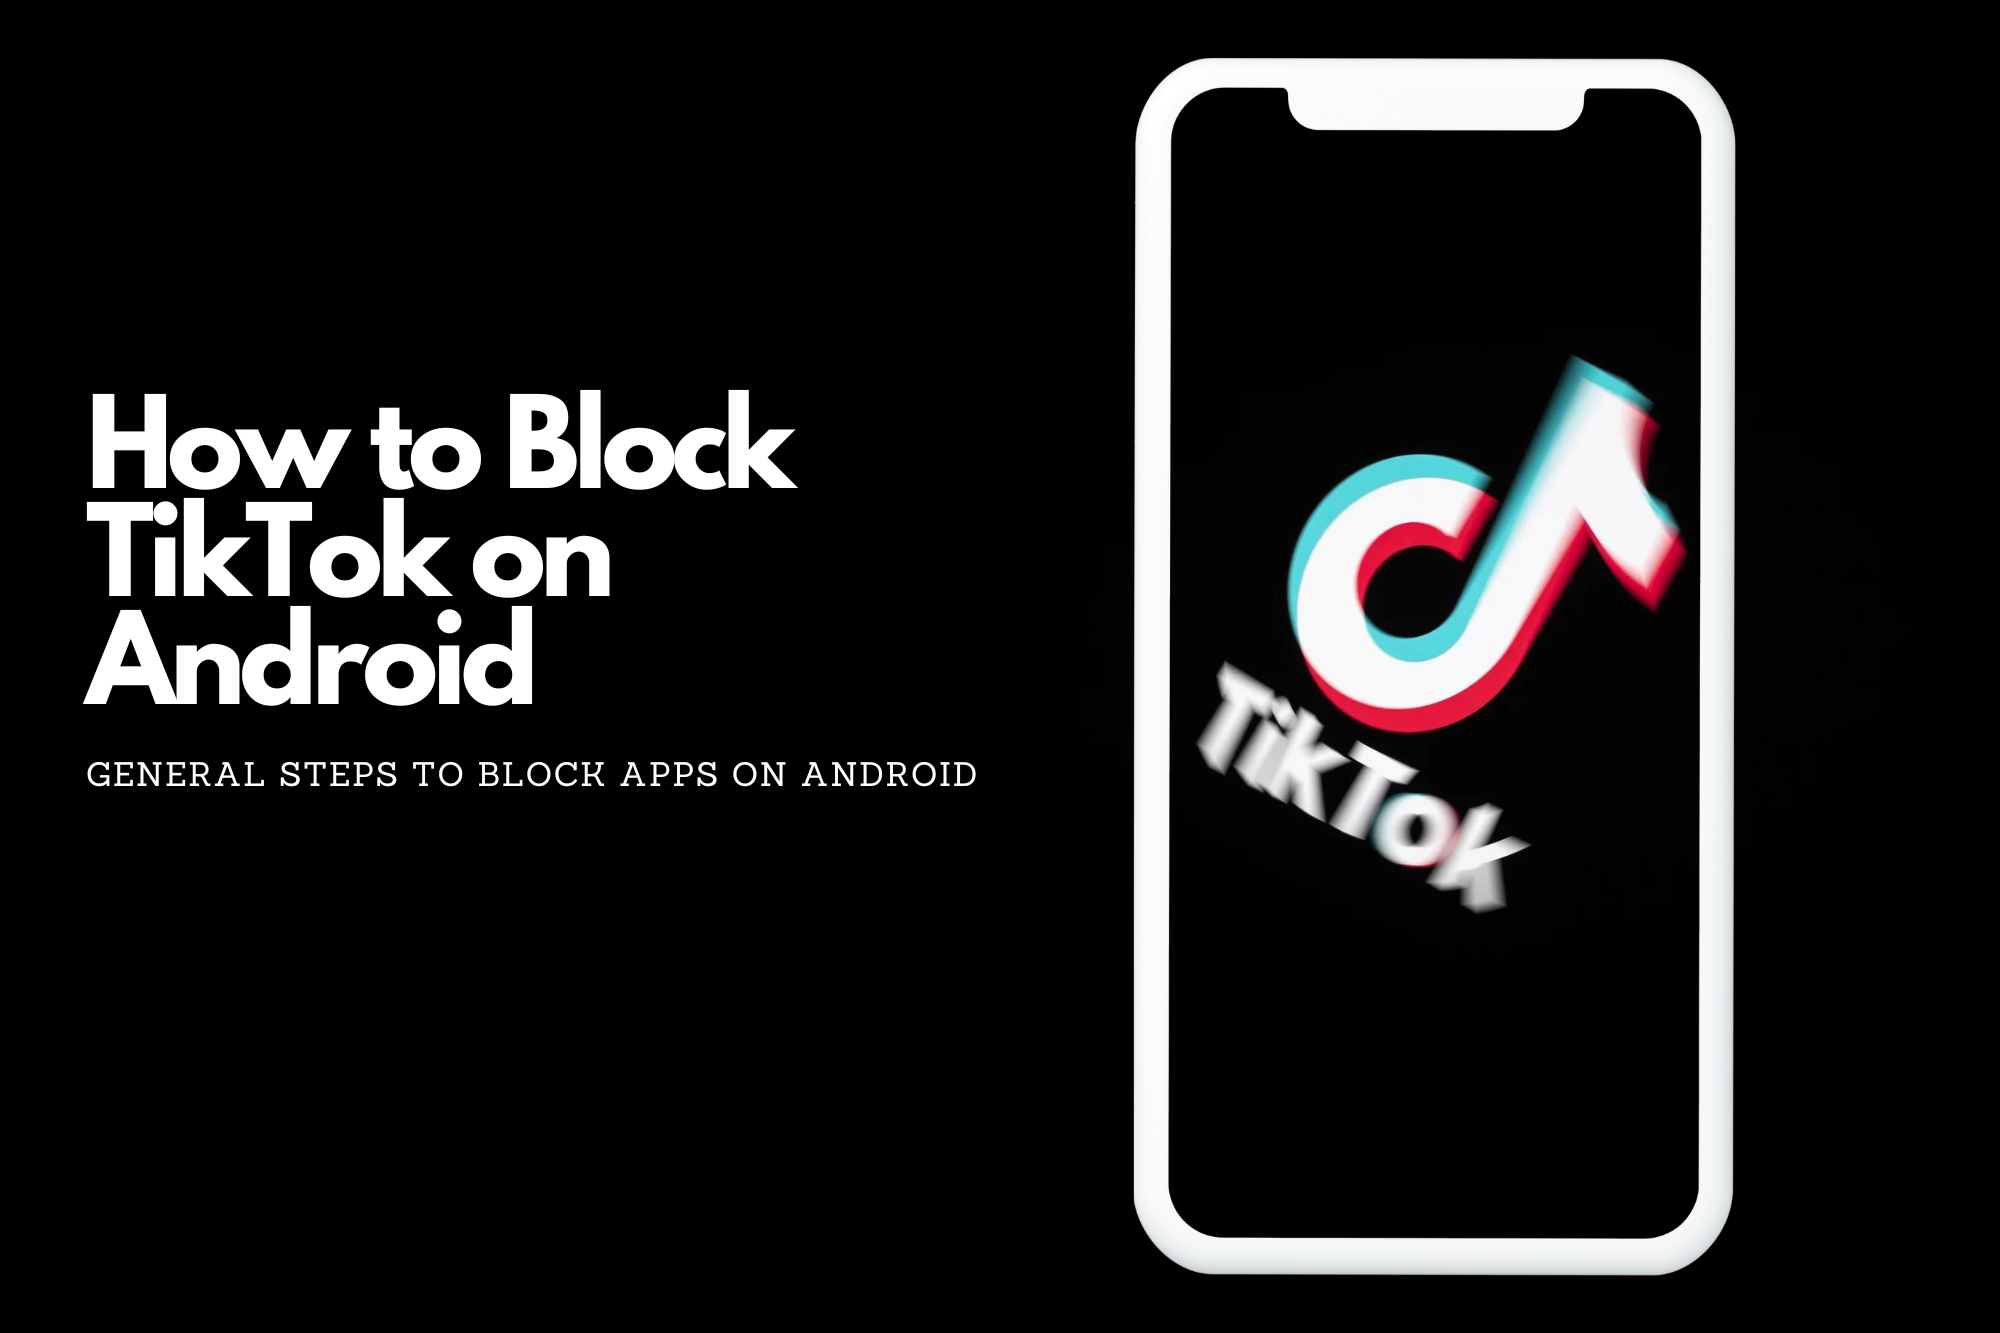 How to Block TikTok on Android